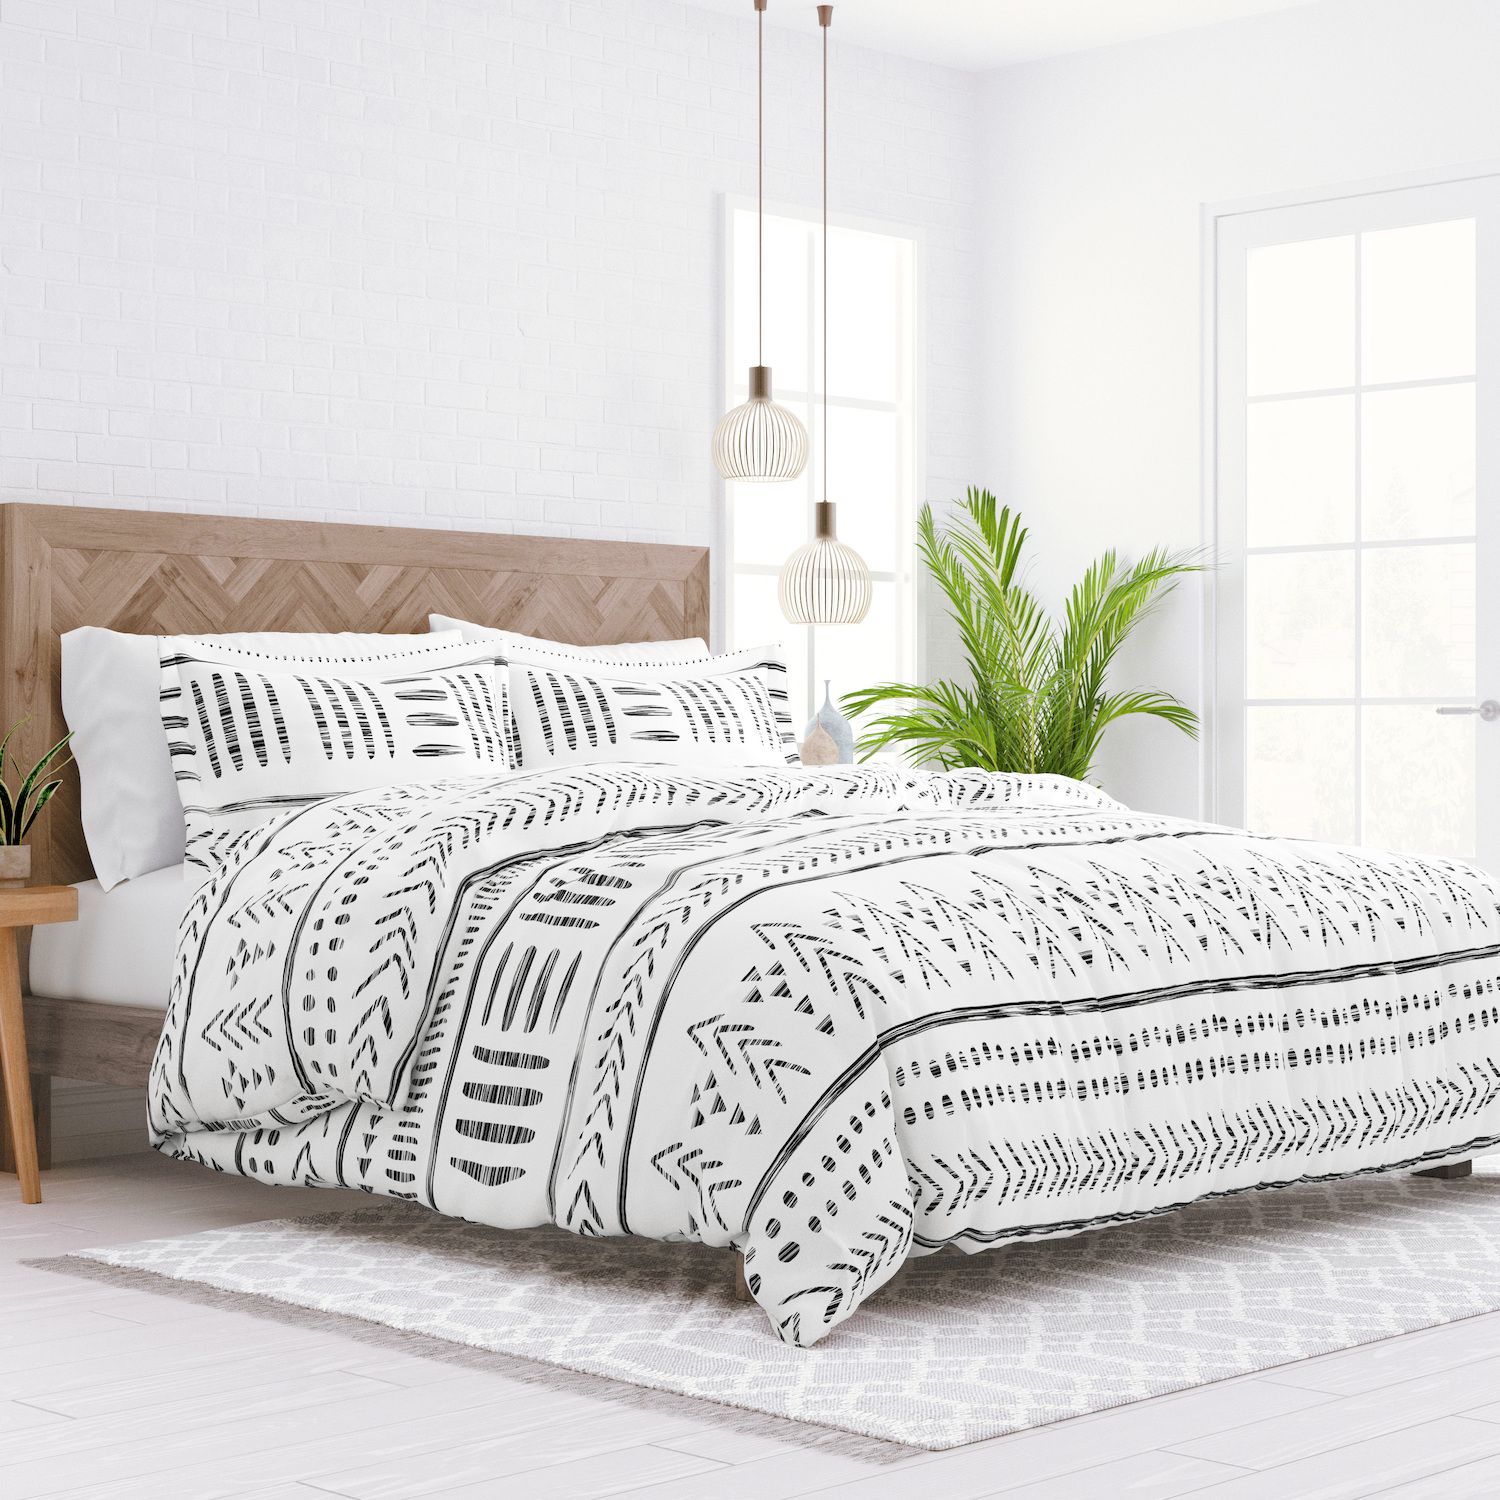 Image for Home Collection Premium Ultra Soft Arrow Dreams Duvet Cover Set at Kohl's.